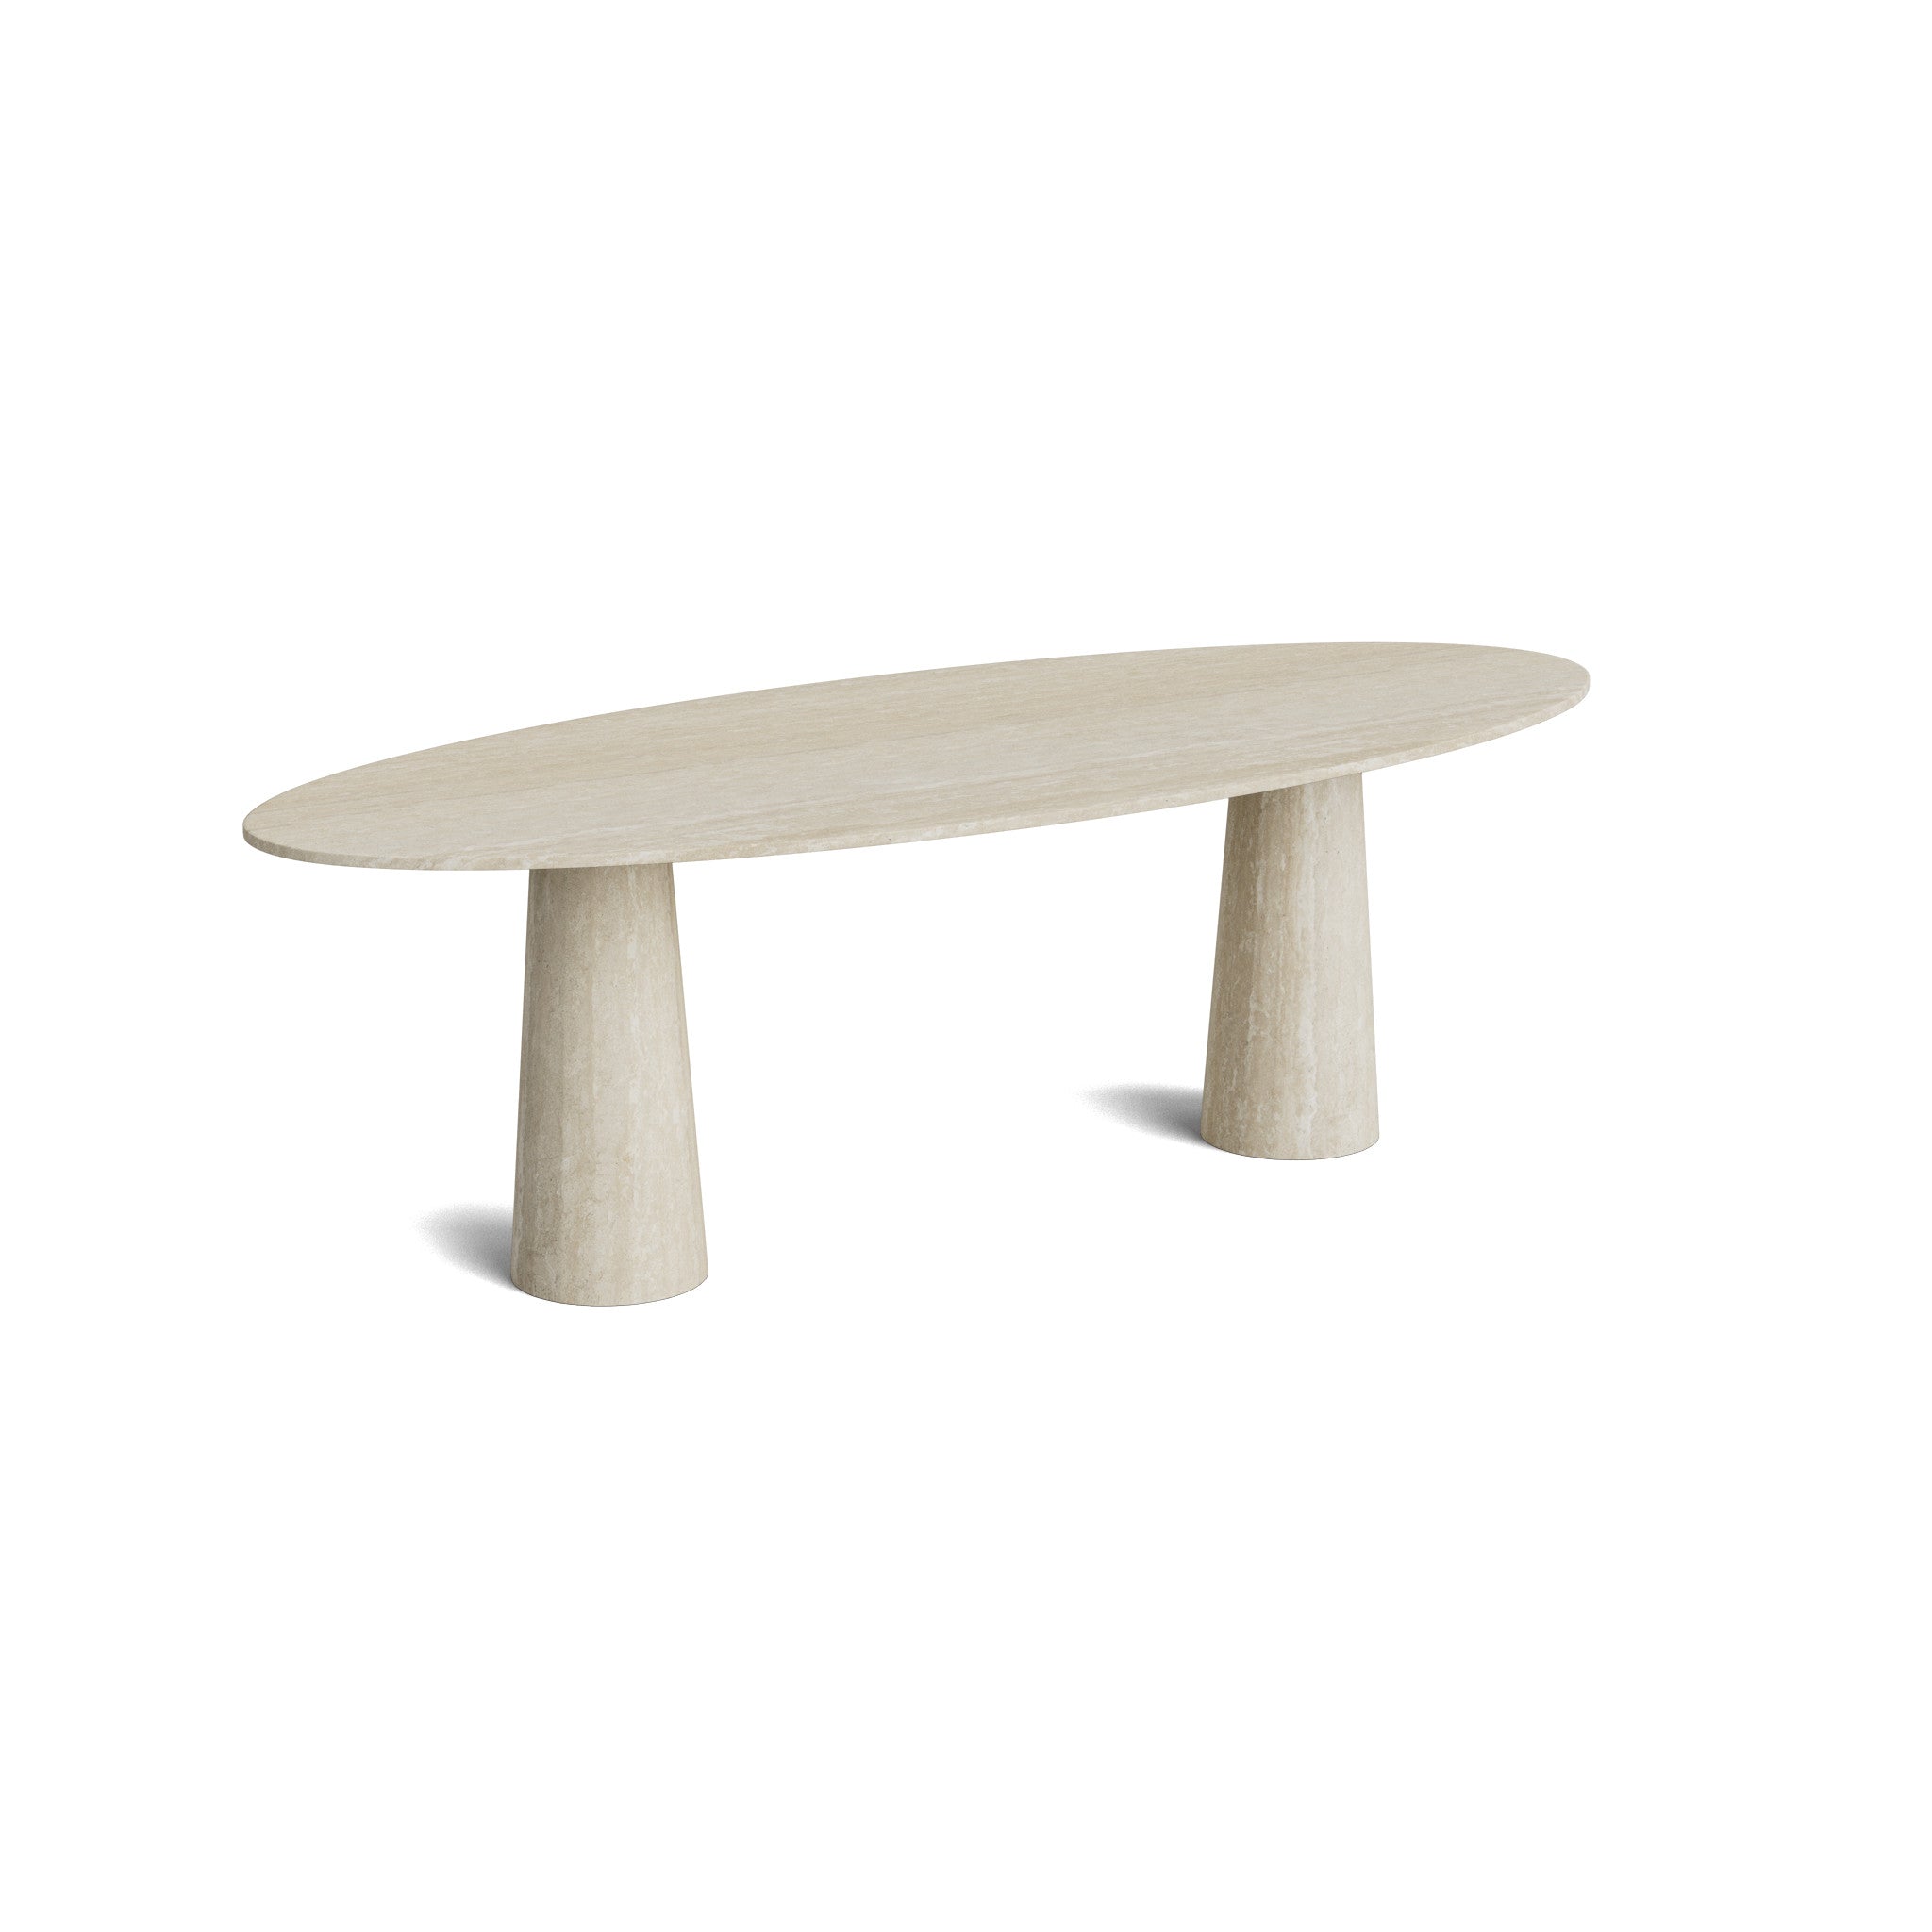 Travertine oval dining table - Light Veincut - Pebble Small - Honed